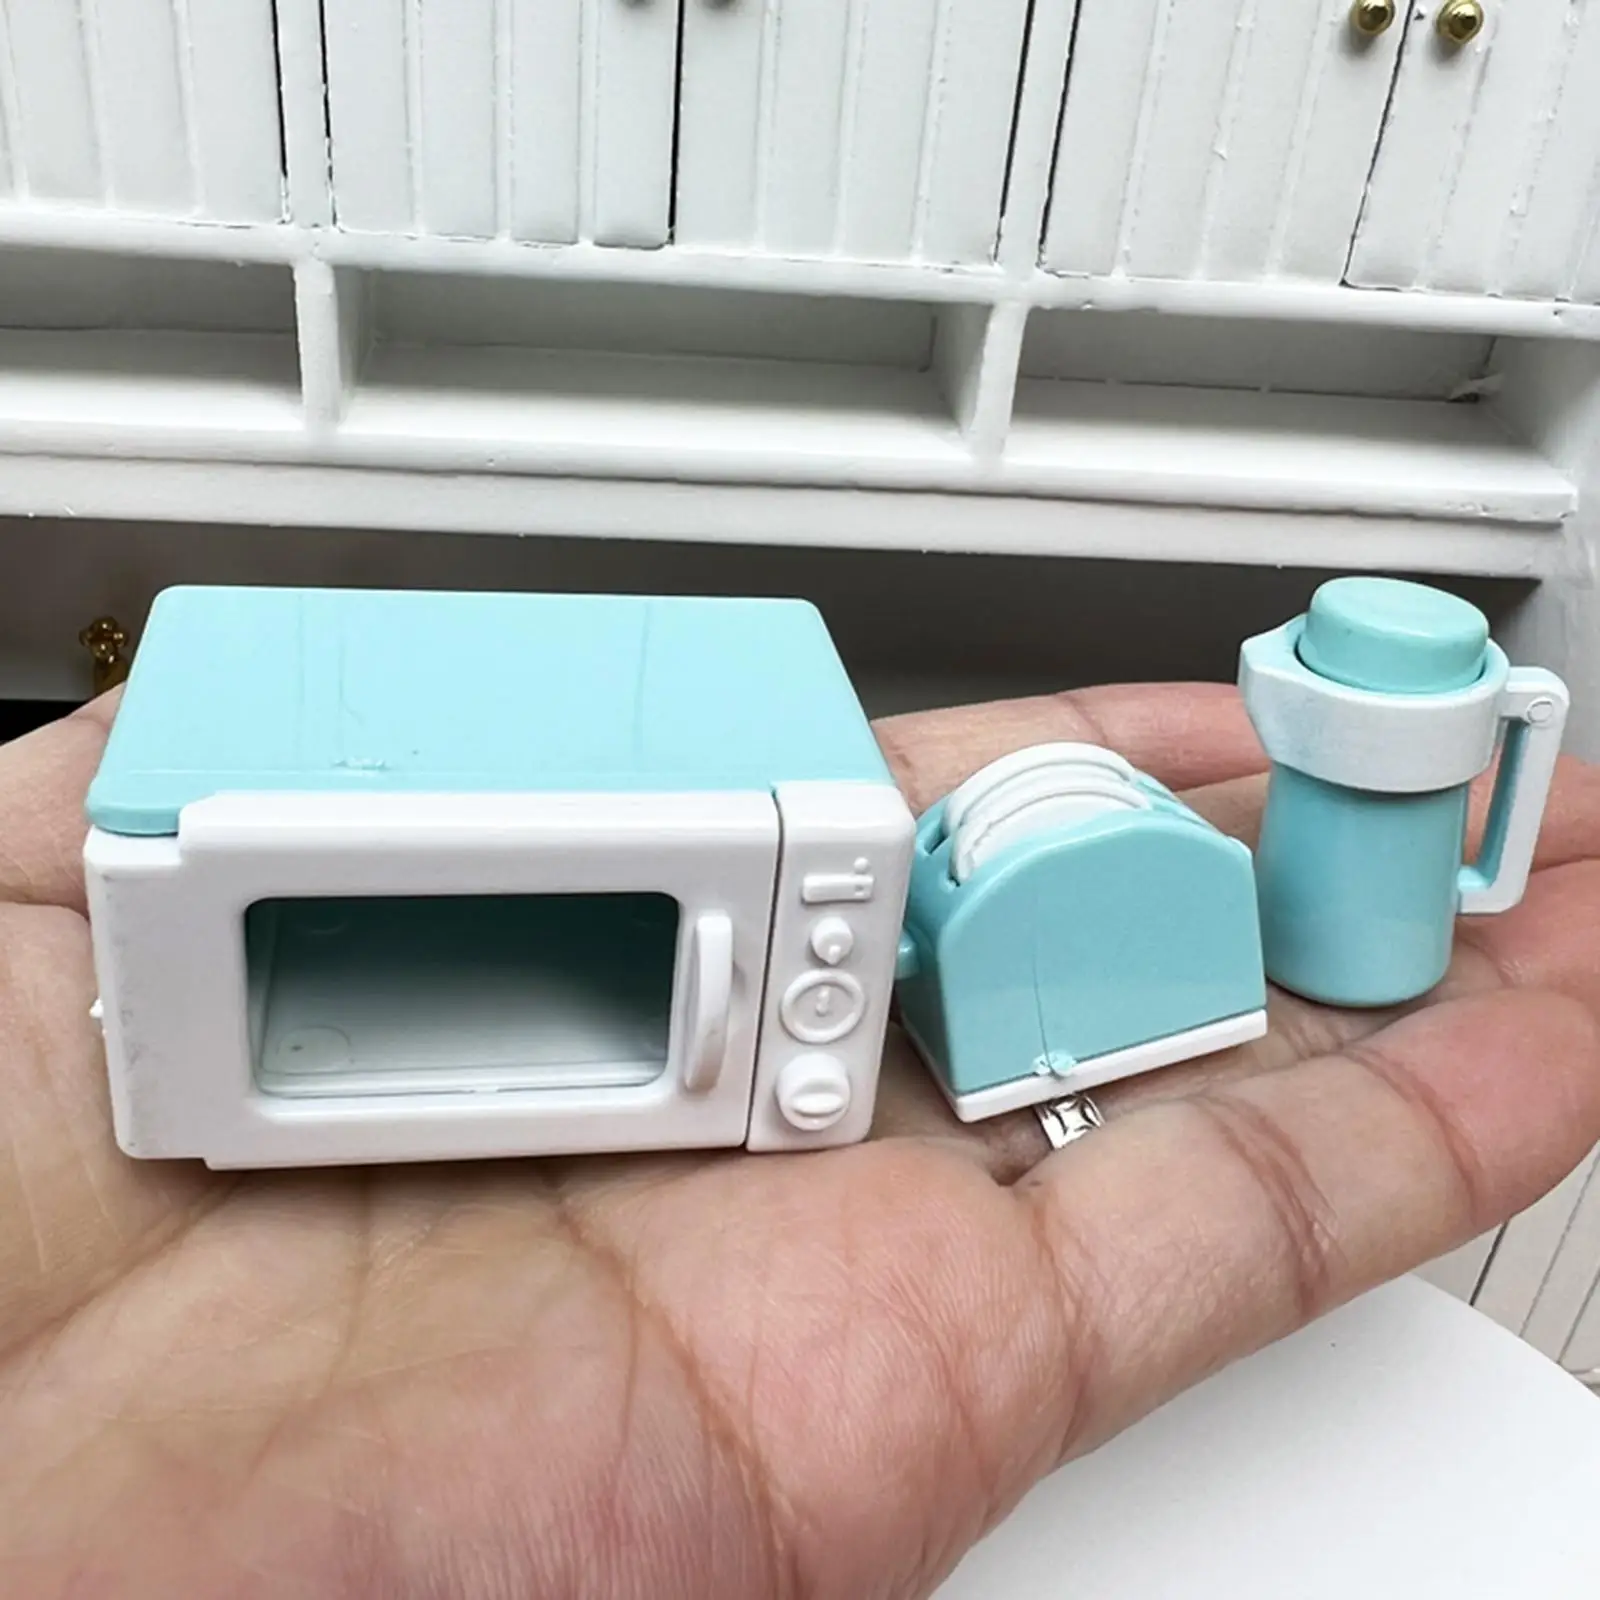 1:12 Scale Dollhouse Kitchen Microwave Oven Playset Furniture for Ornament Kids Gifts